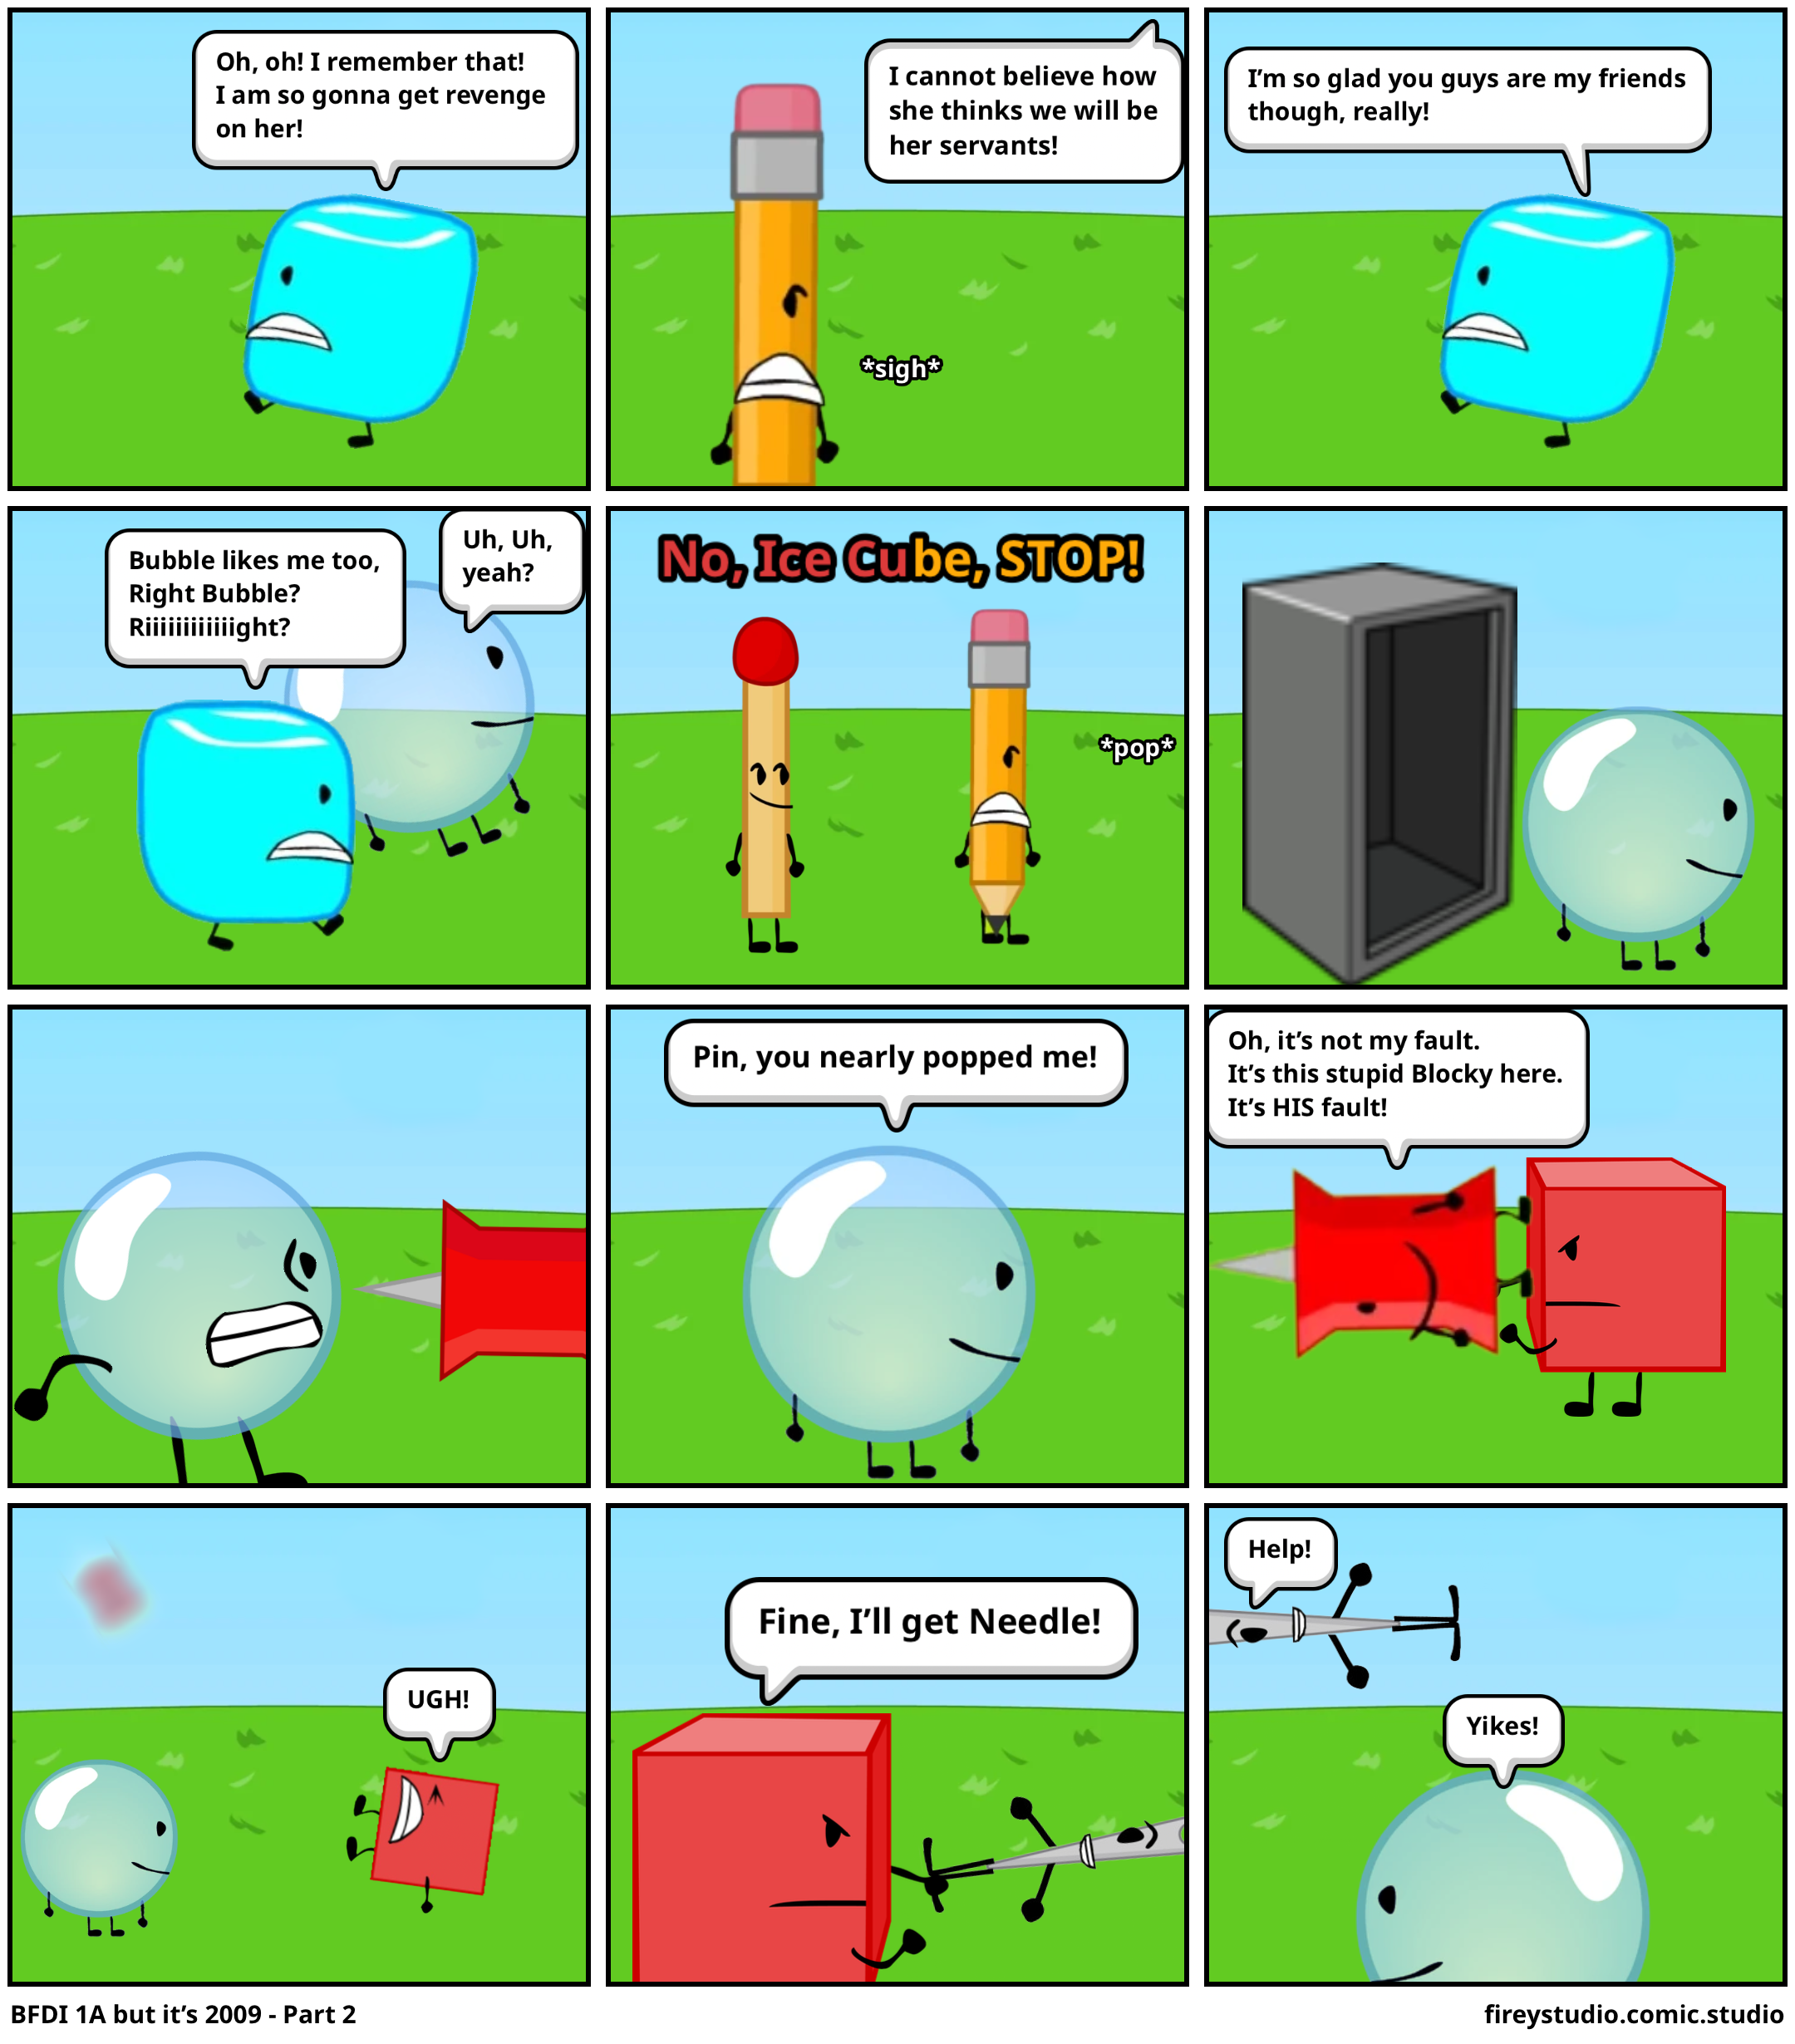 BFDI 1A but it’s 2009 - Part 2